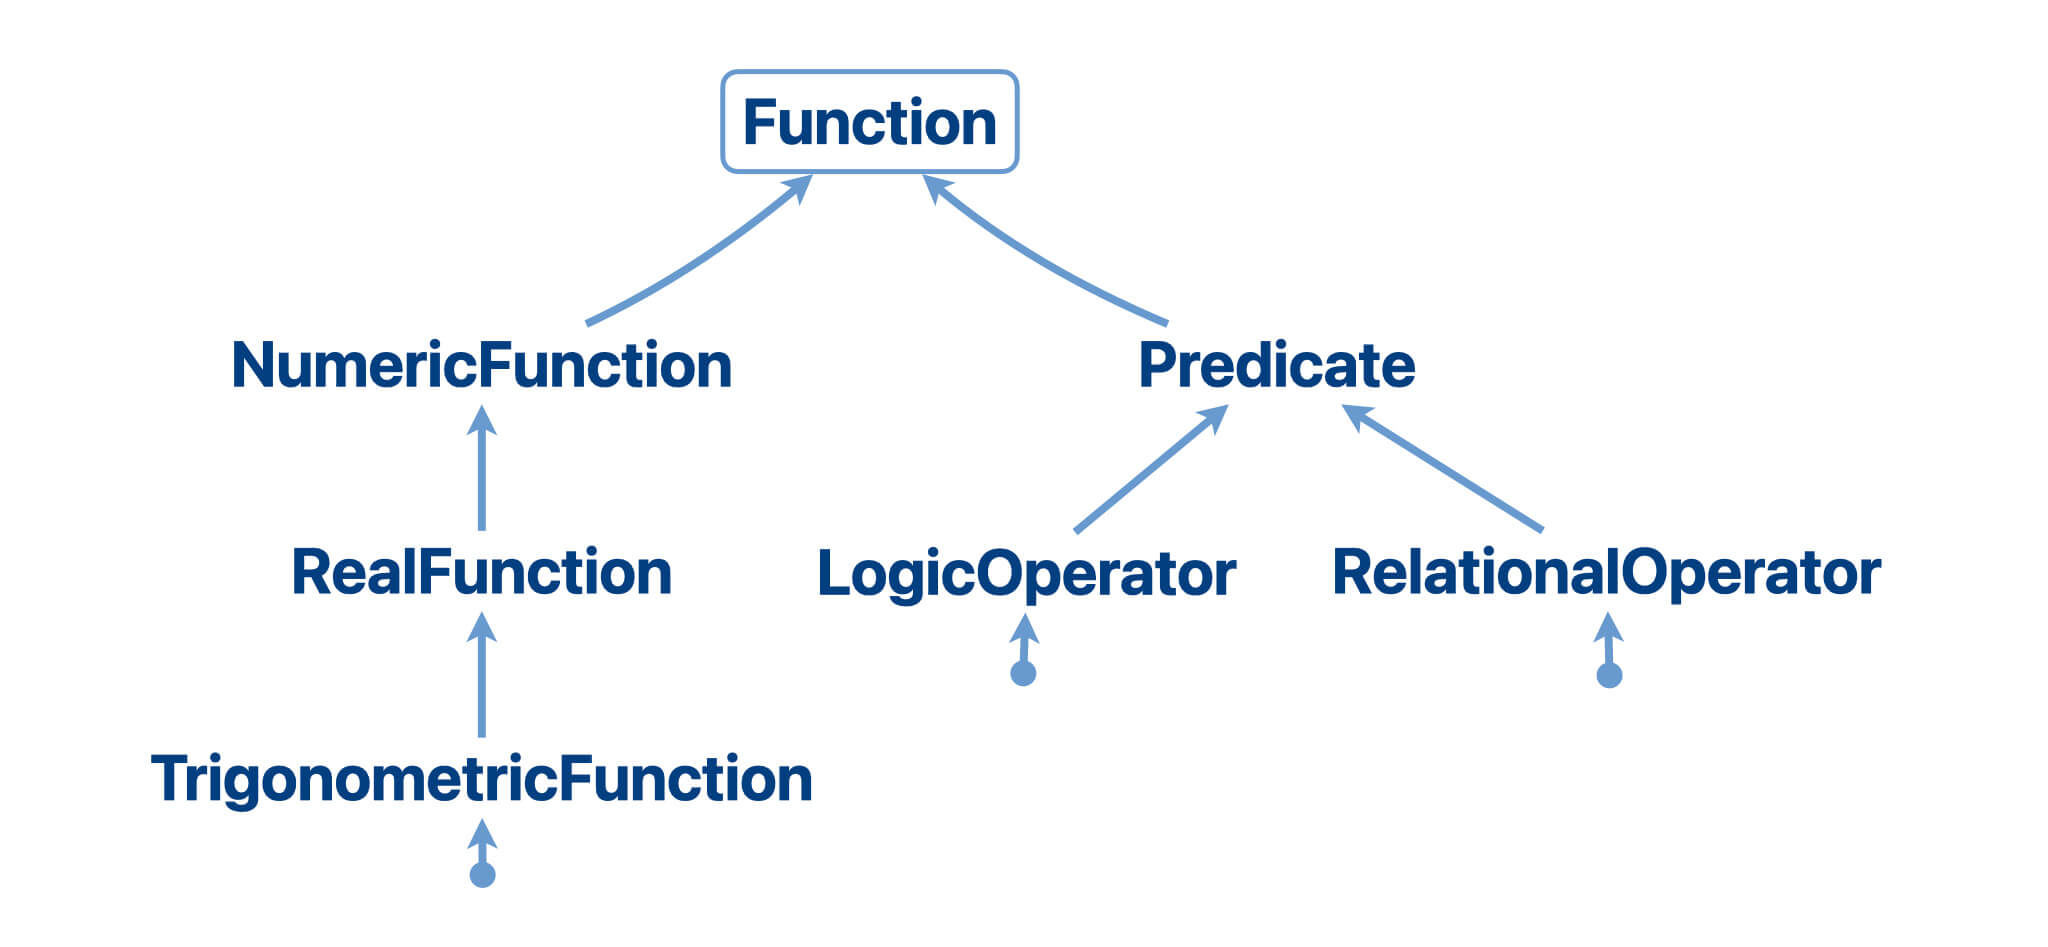 Function domains